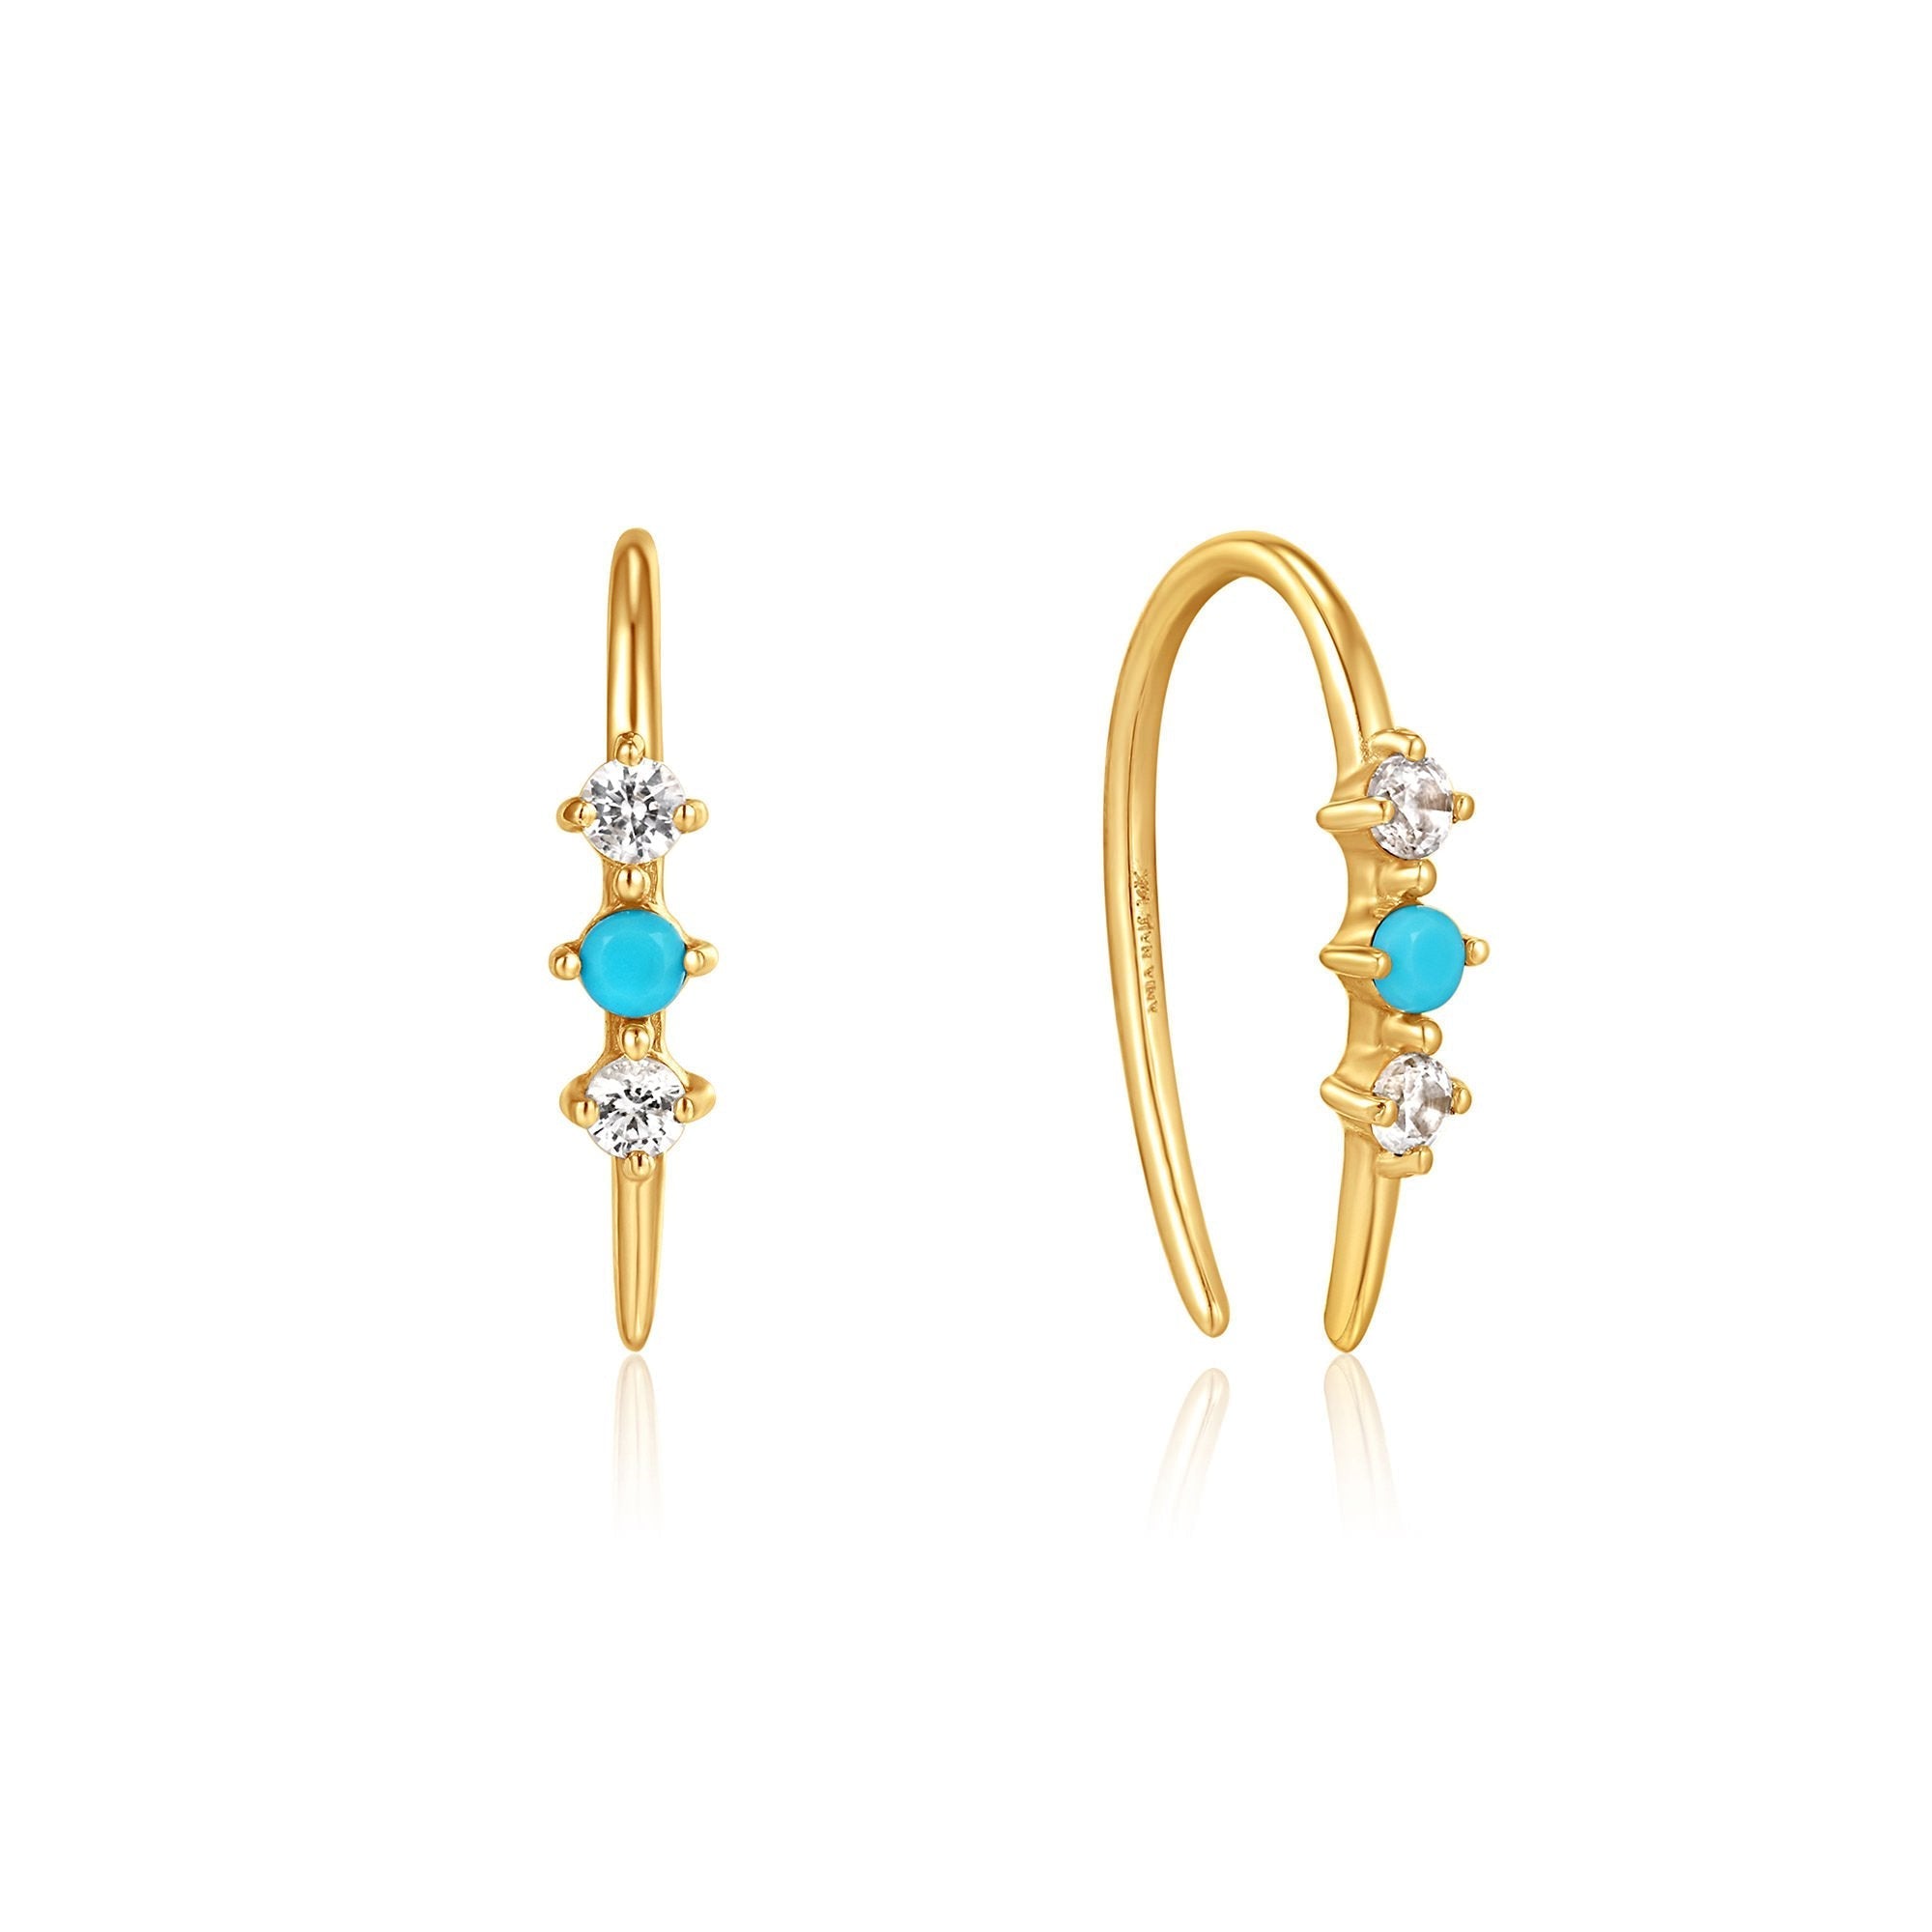 Ania Haie 14kt Gold Turquoise Cabochon and White Sapphire Hook Earrings